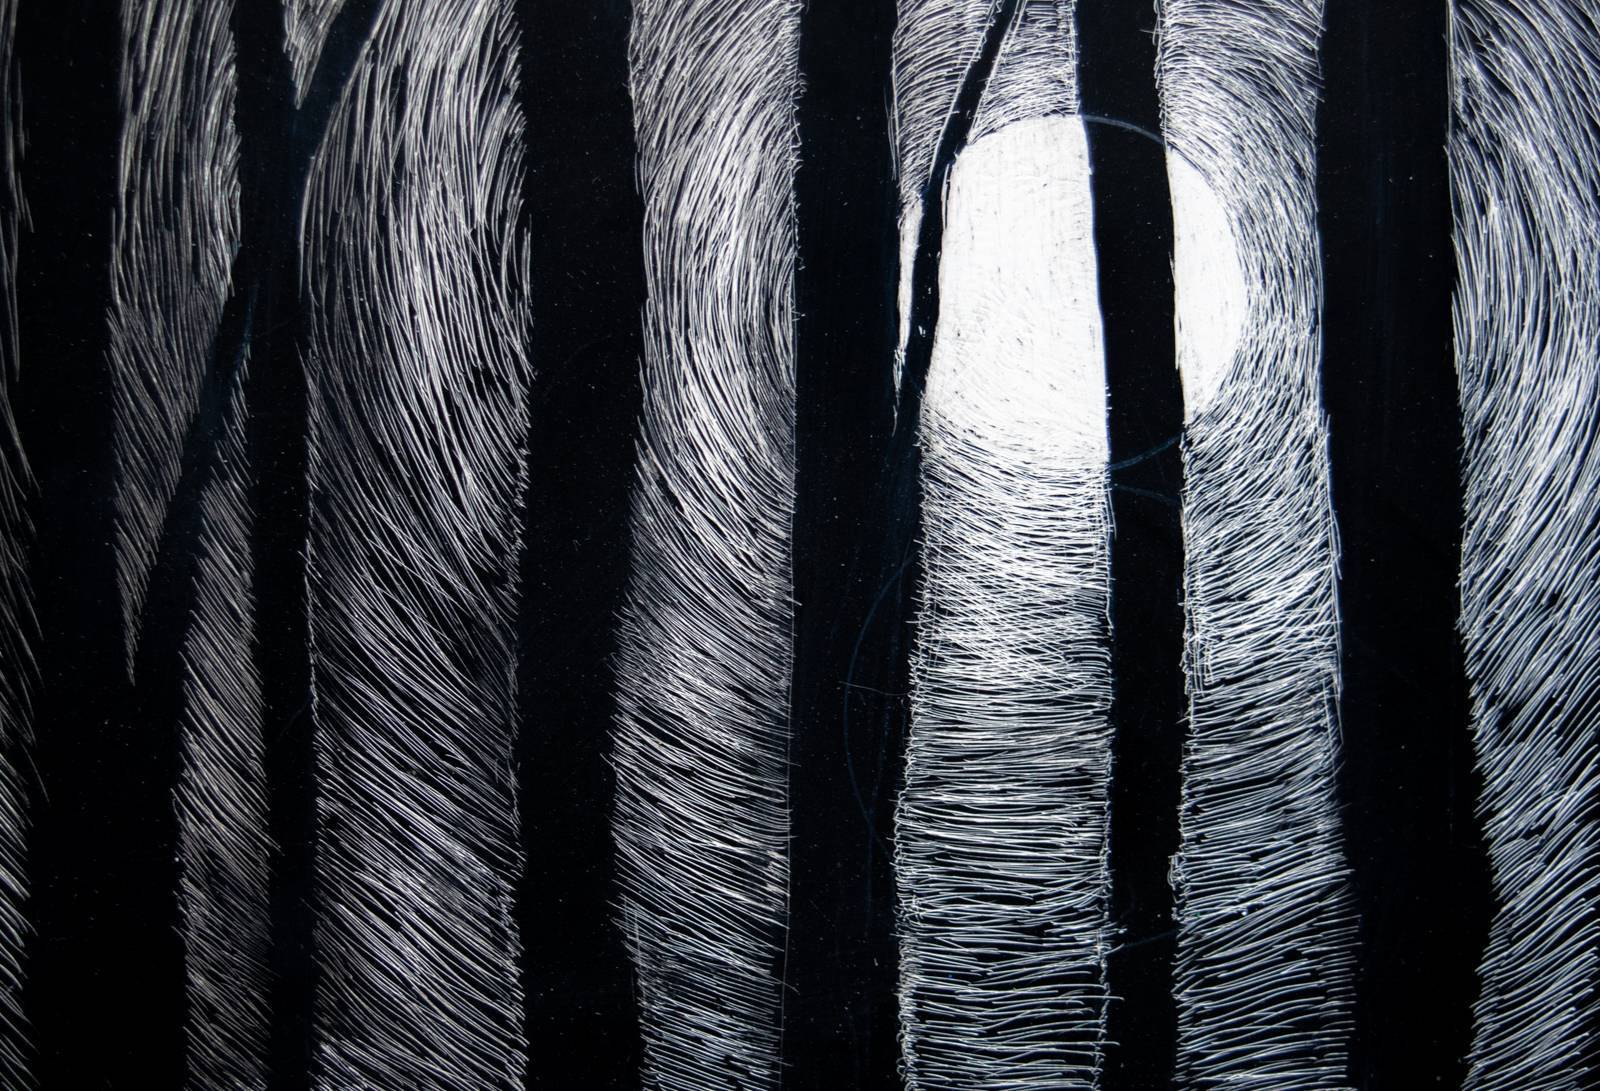 Trees Silhouette Against Moon Scratchboard